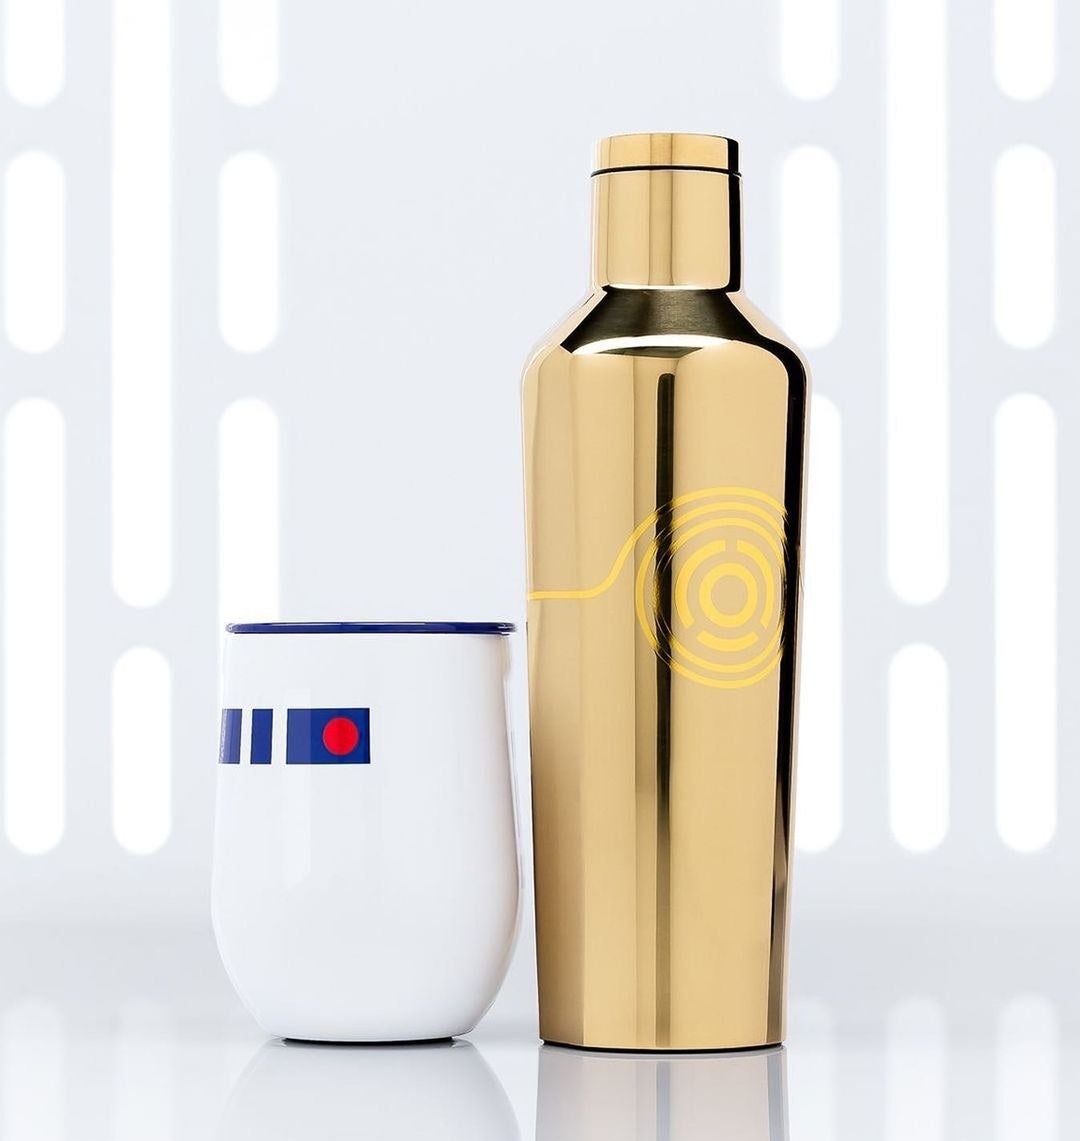 A glossy water bottle styled as c3po from star wars